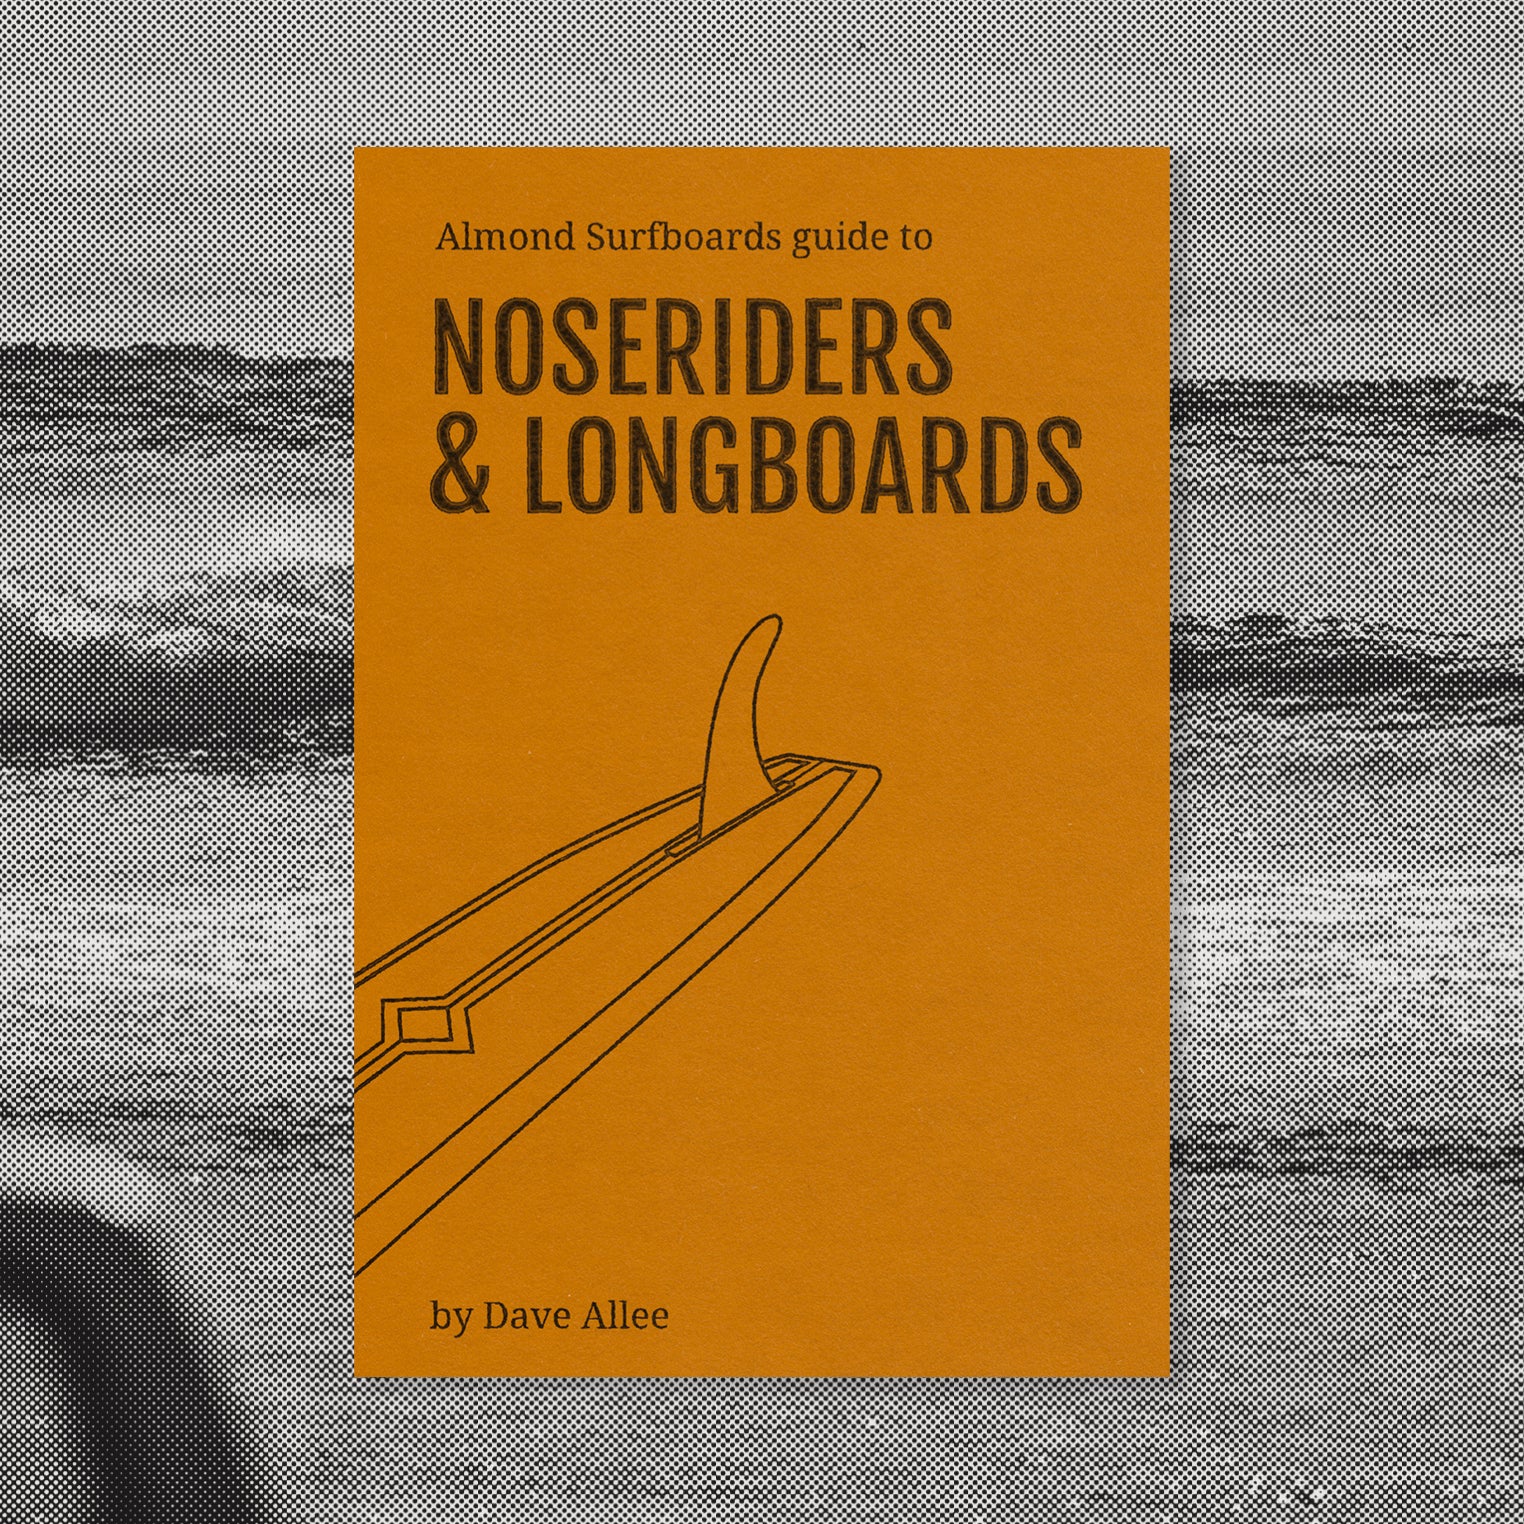 Almond's Guide to Noseriders & Longboards